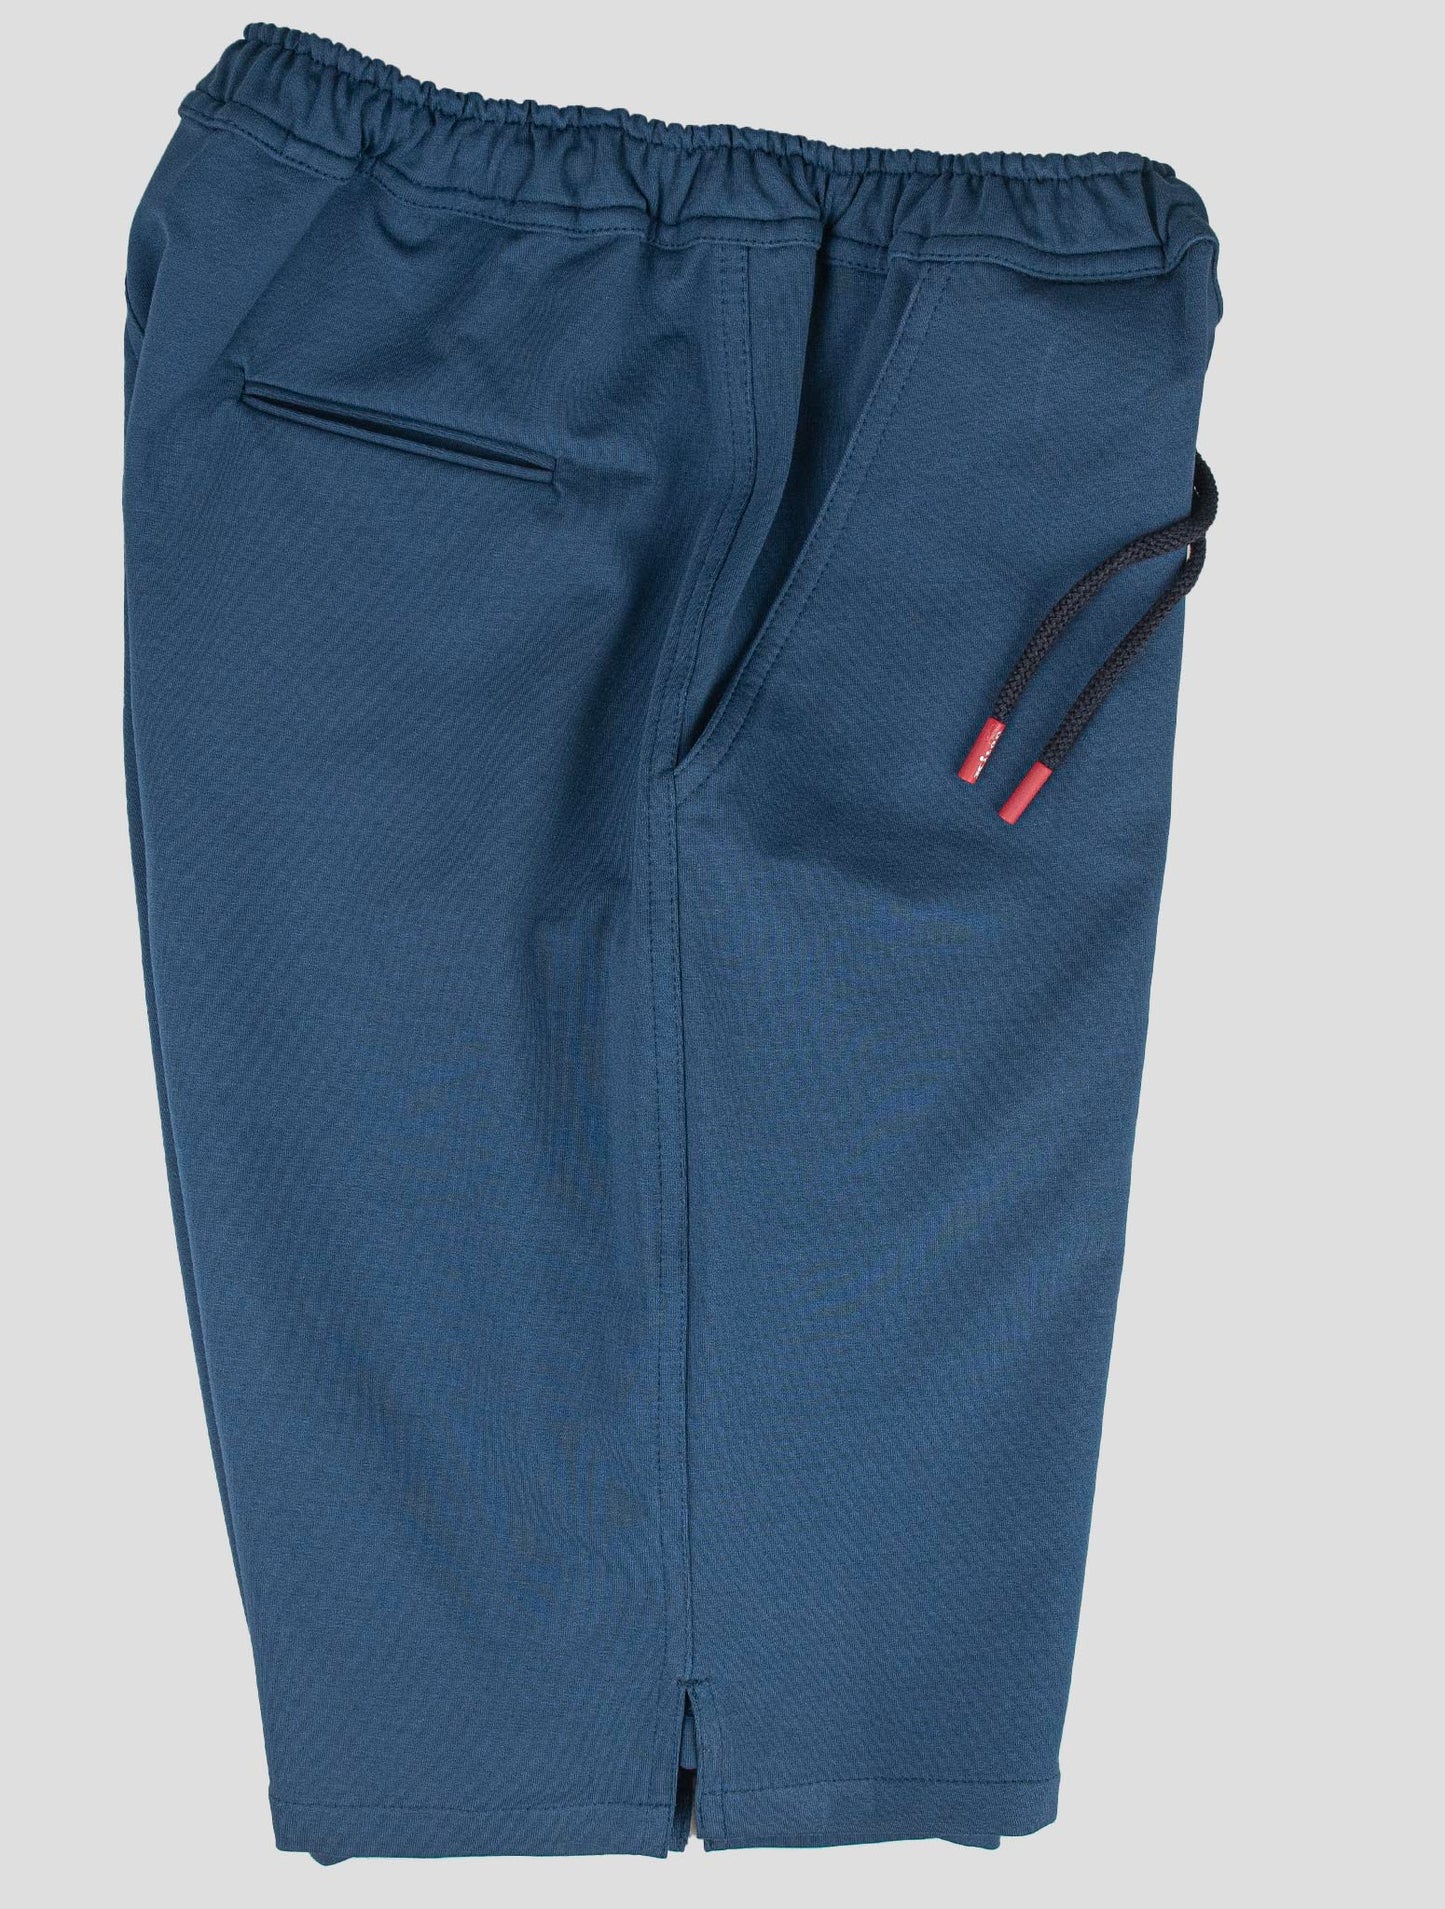 Kiton Matching Outfit - Multicolor Mariano and Blue Short Pants Tracksuit